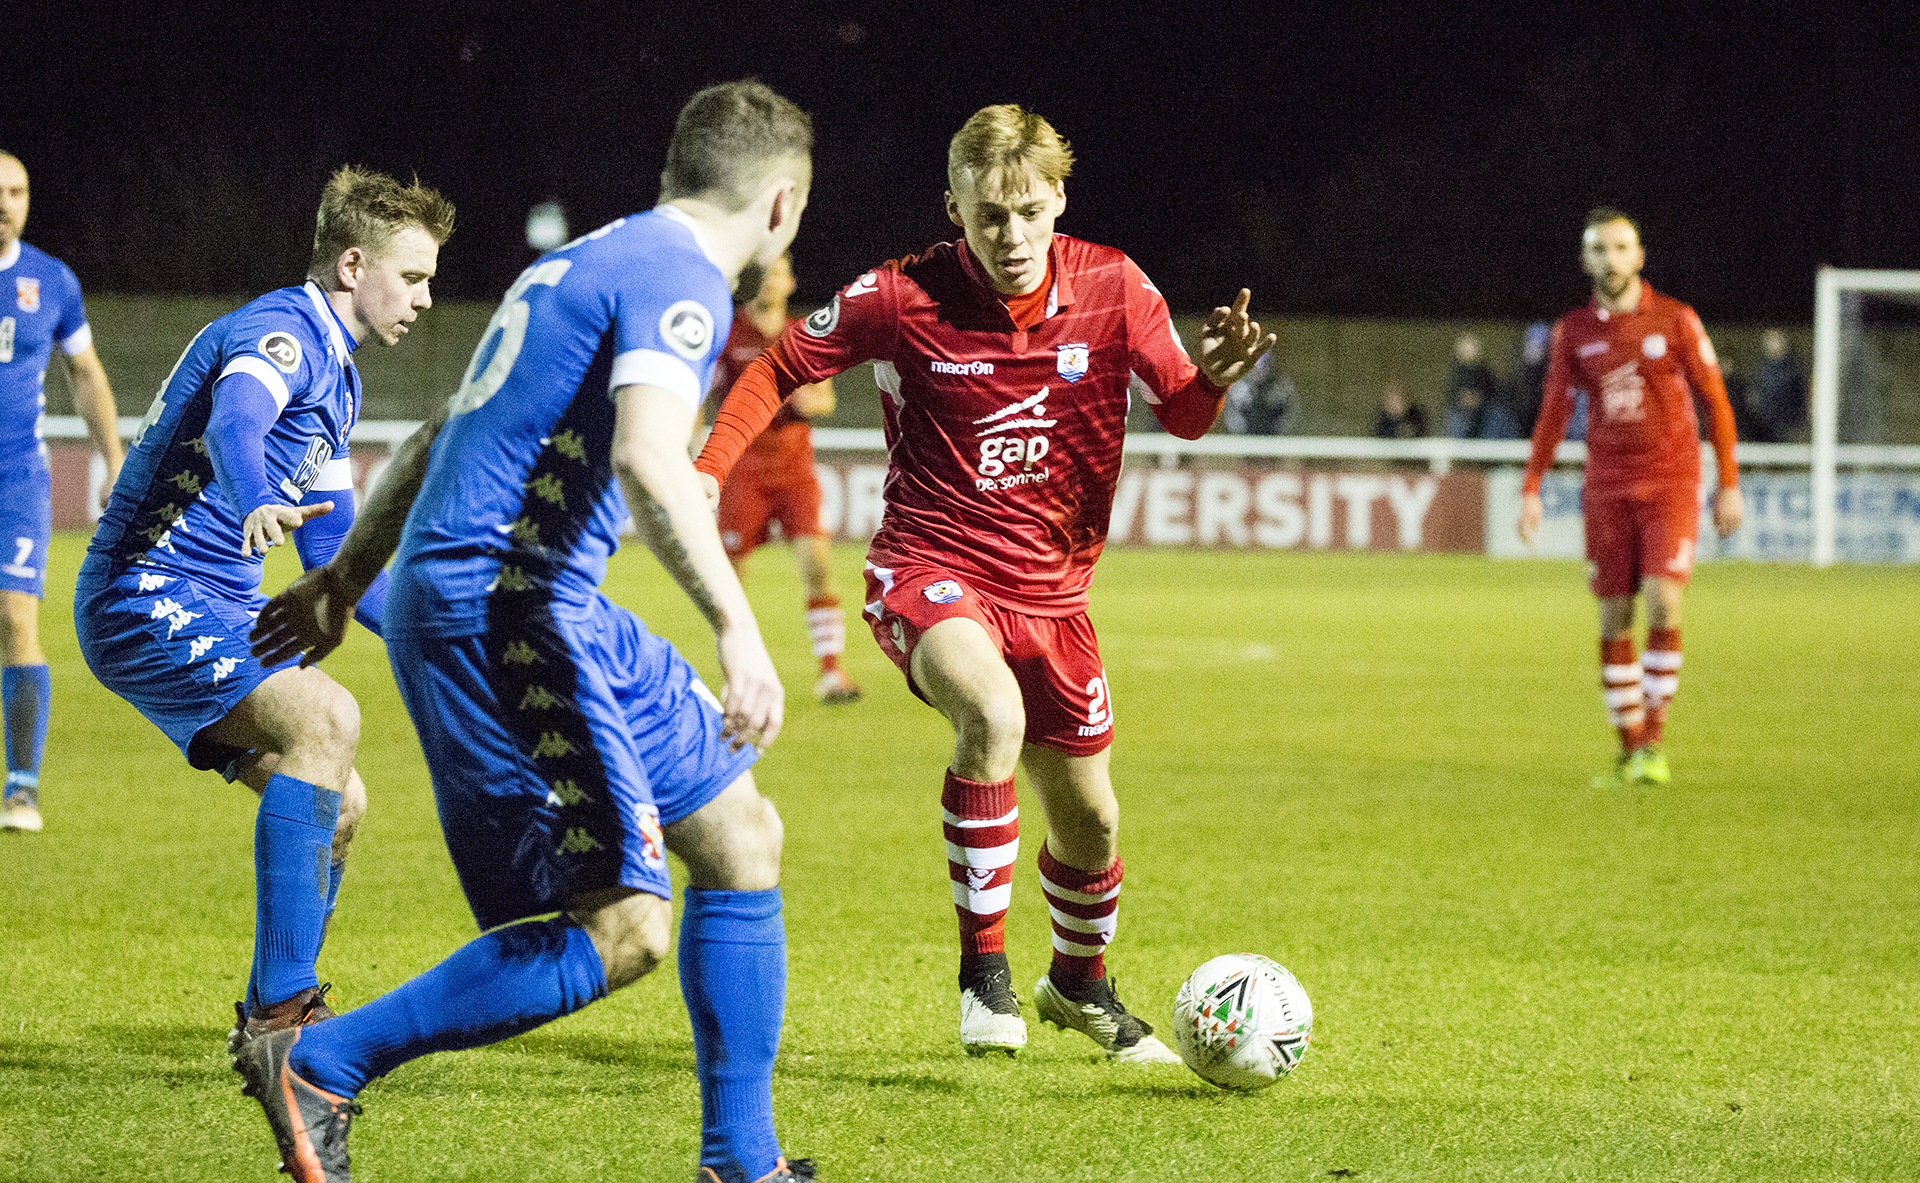 Rob Hughes came on late in the game to make his Nomads debut - © NCM Media